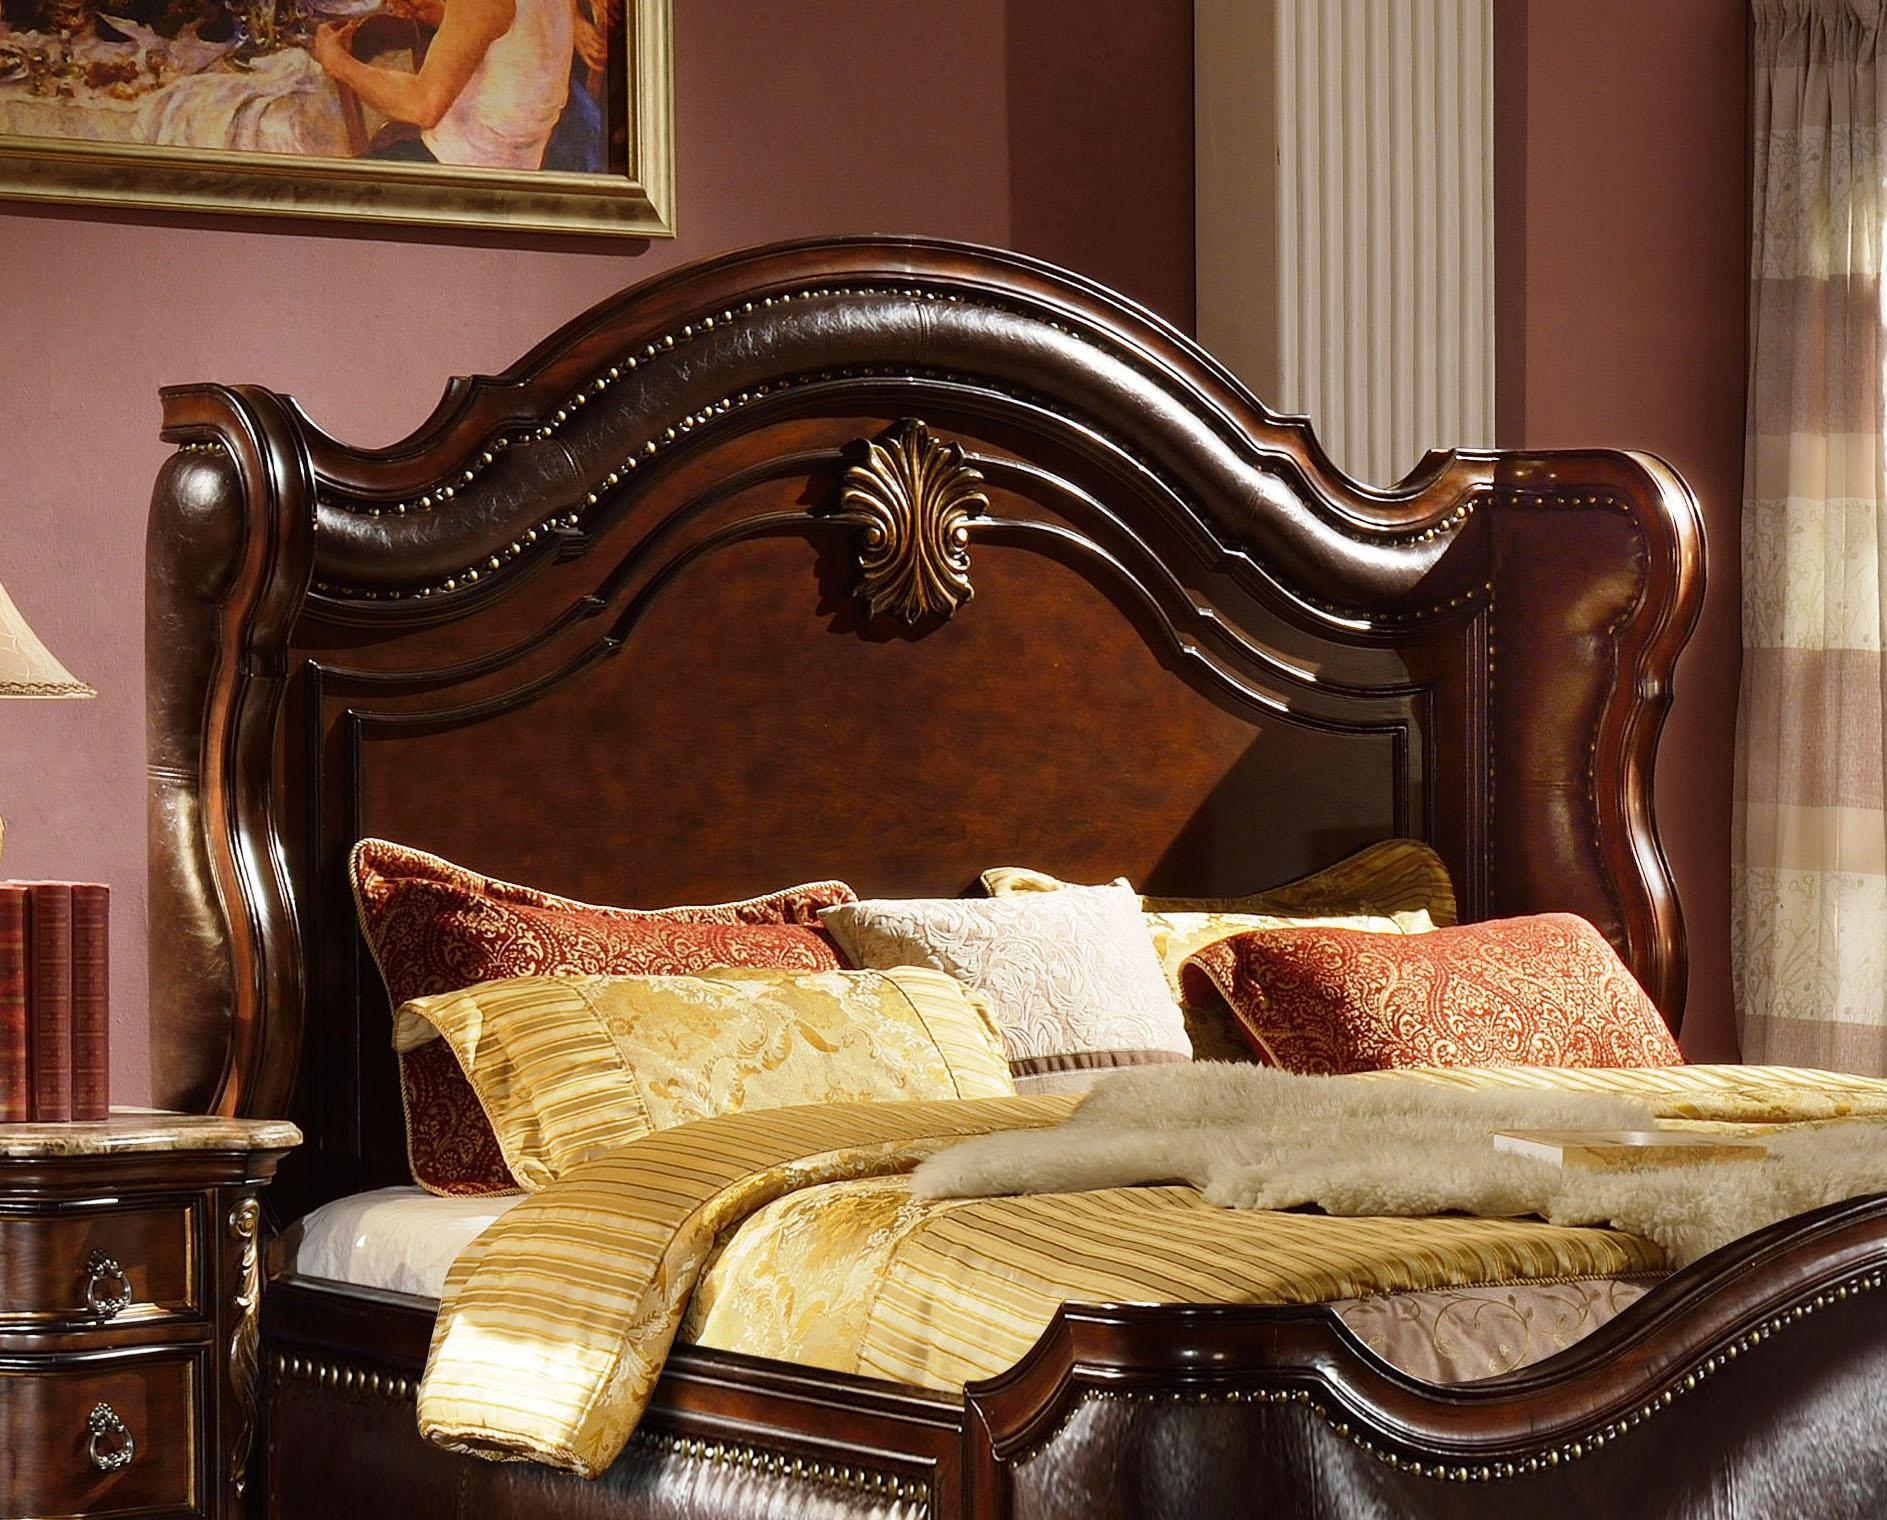 

    
Cherry Bonded Leather Sleigh King Bed Traditional Mcferran B3000
